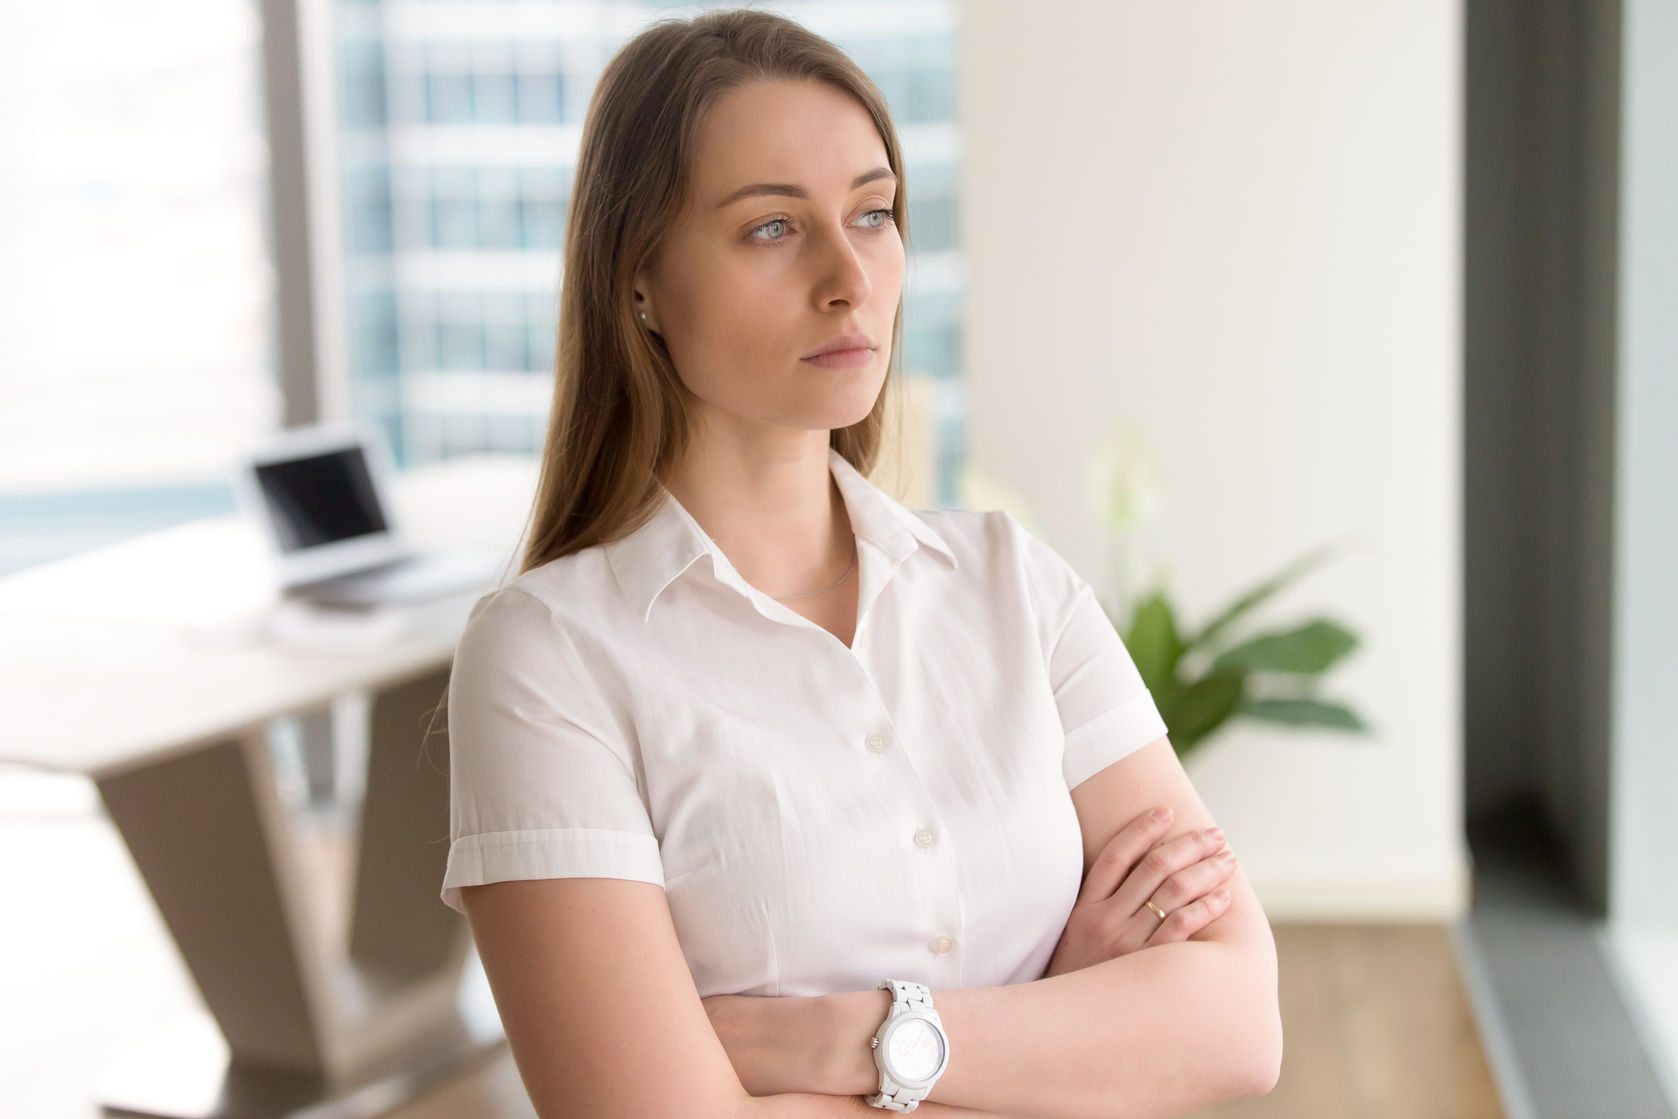 pensive businesswoman standing with arms crossed in modern office interior